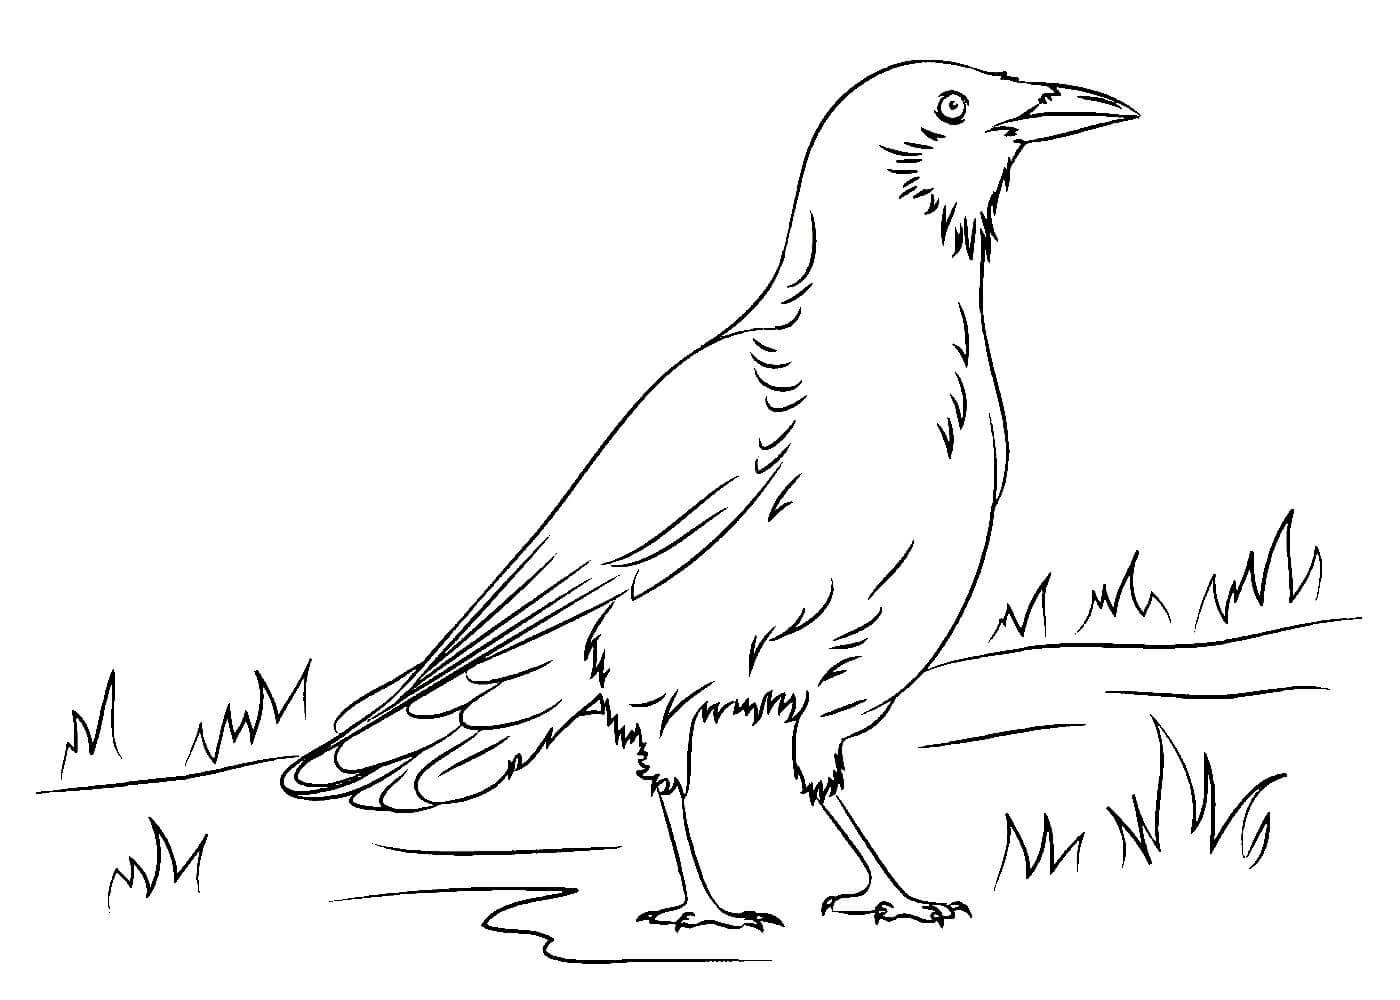 Amazing crow coloring page for 3-4 year olds